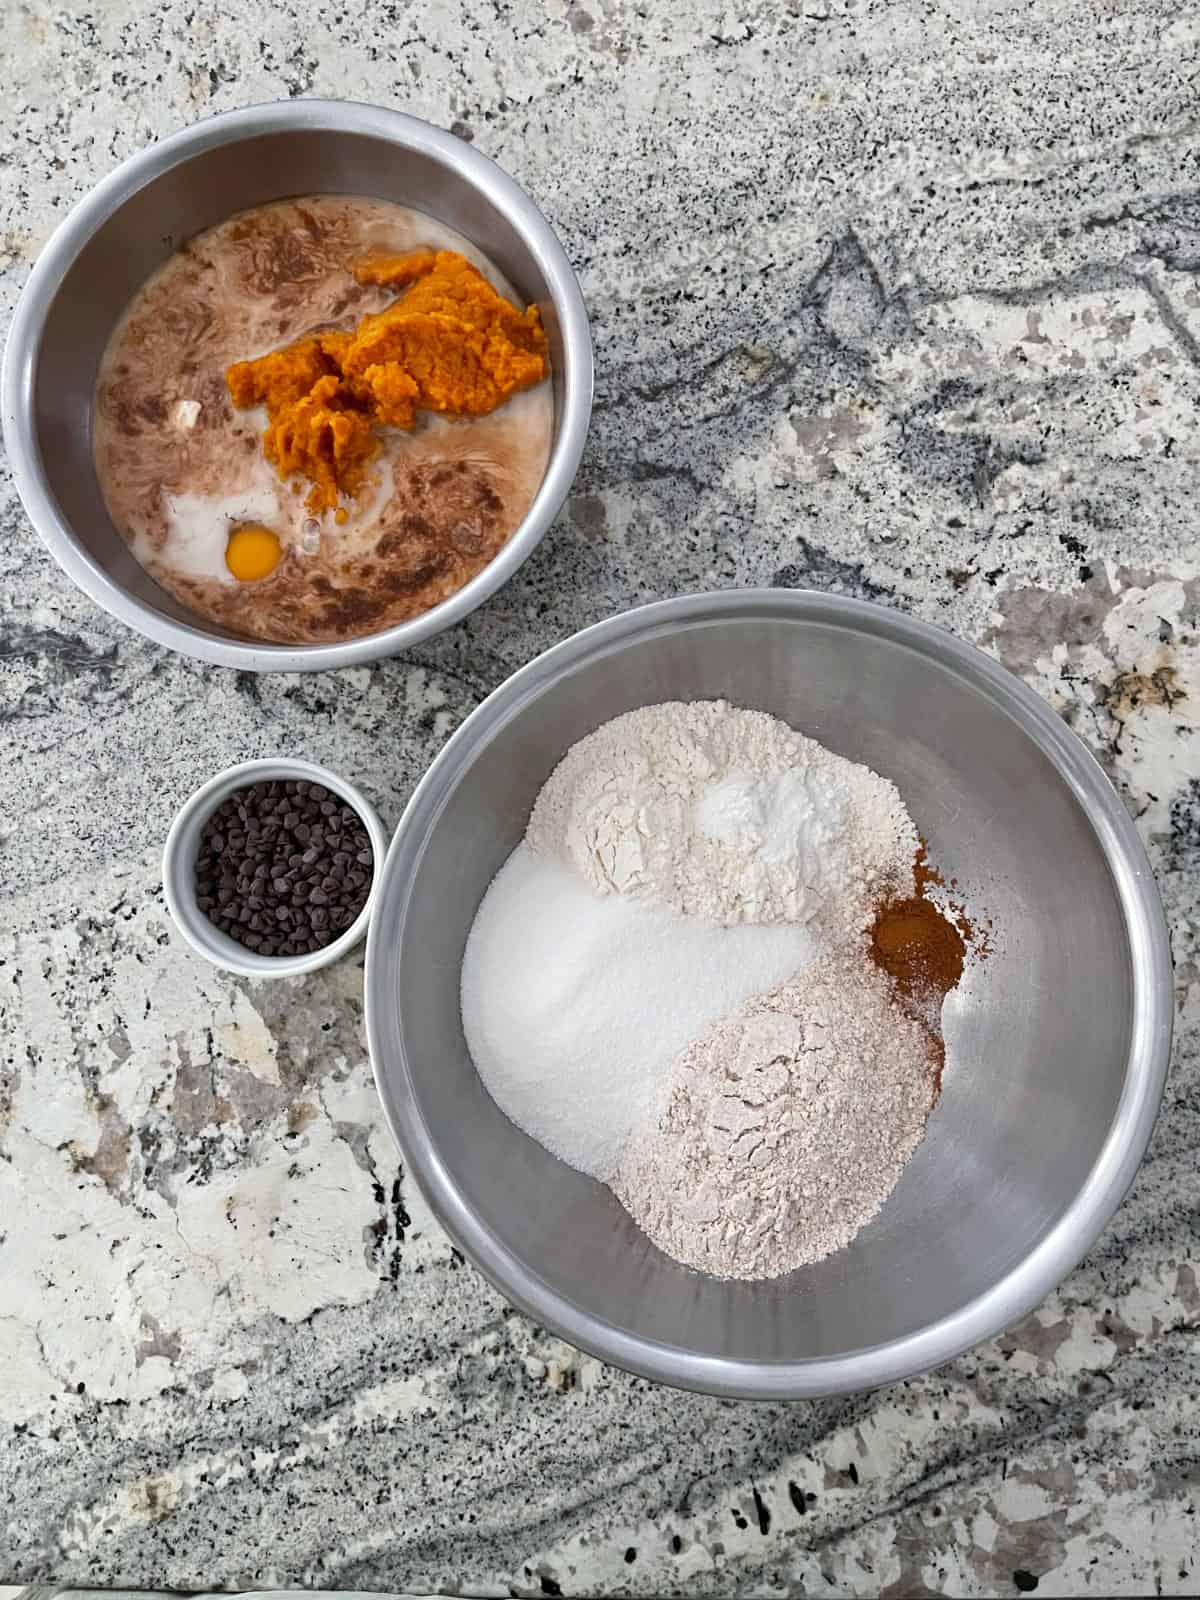 Wet ingredients and dry ingredients in two separate mixing bowls for making pumpkin chocolate chip cake.